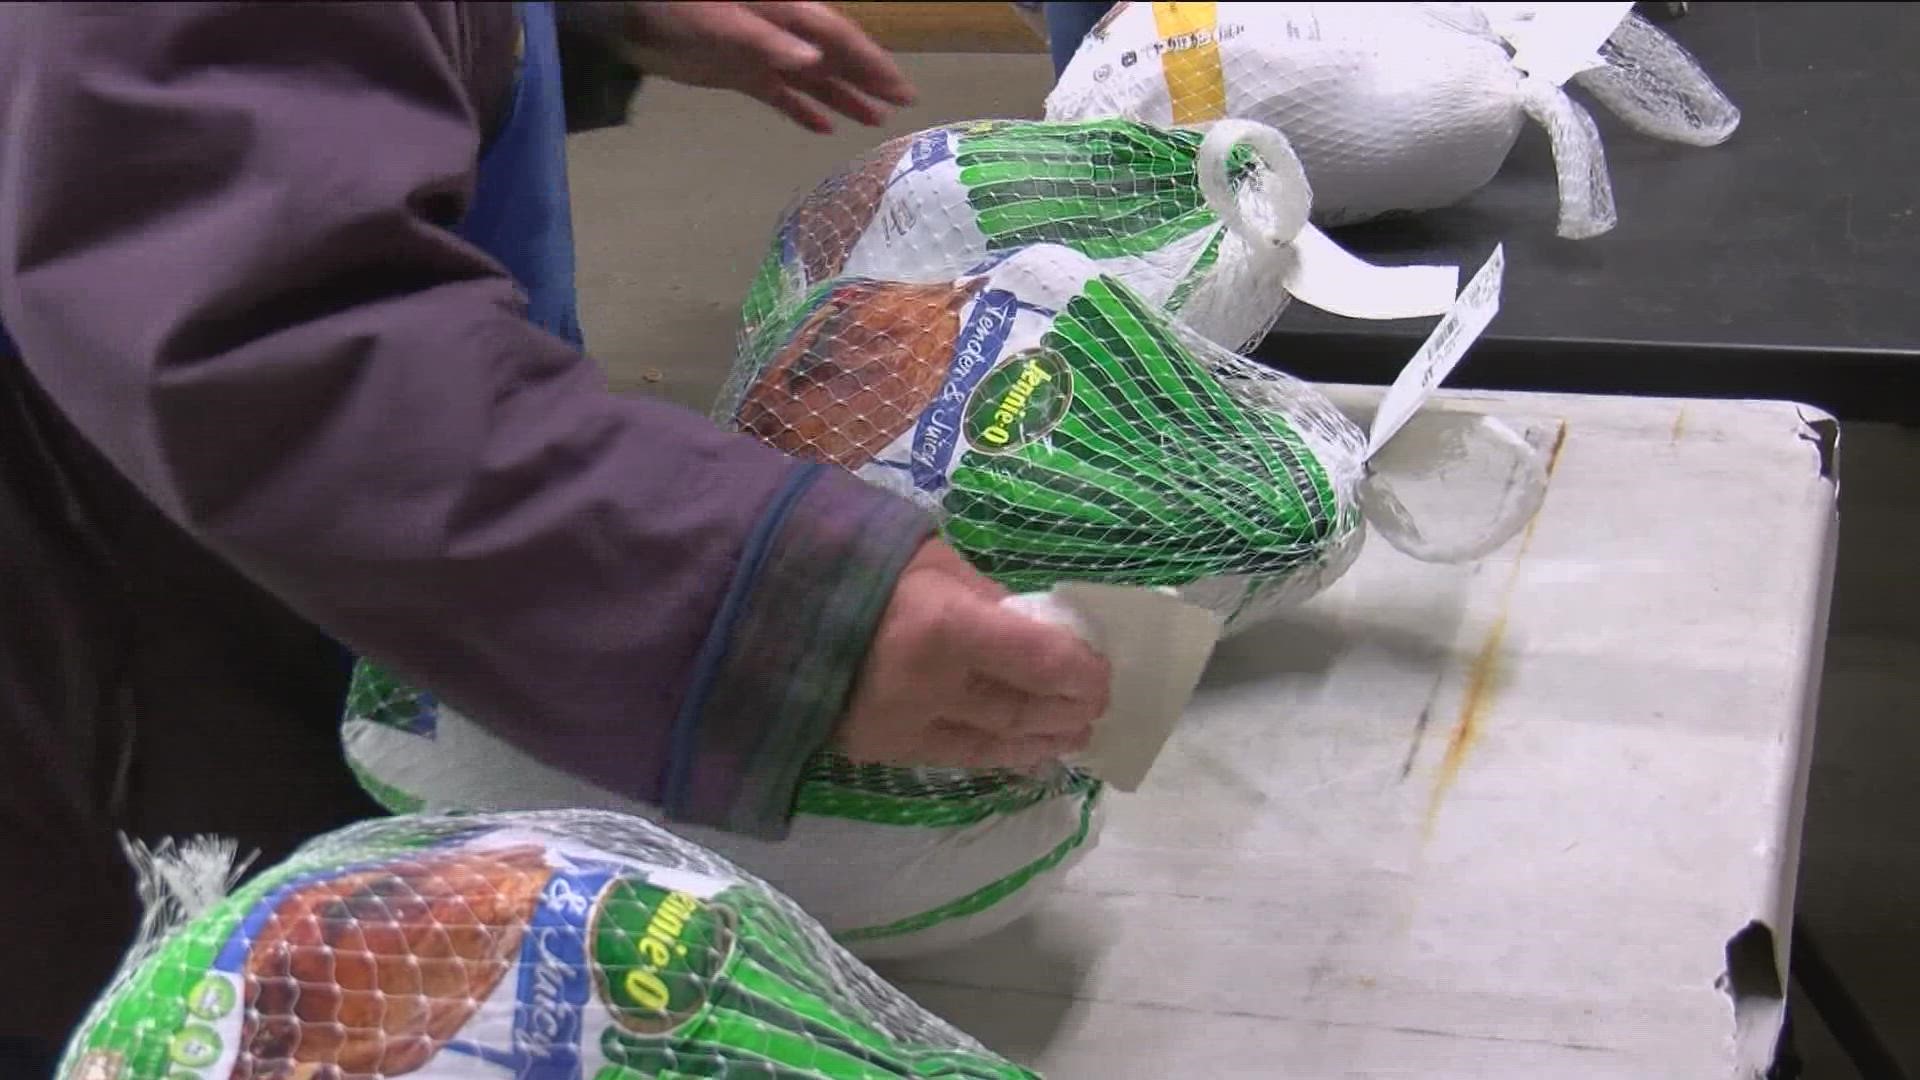 Local food banks need donations of food, money and volunteer time to help meet the need for the holiday season.